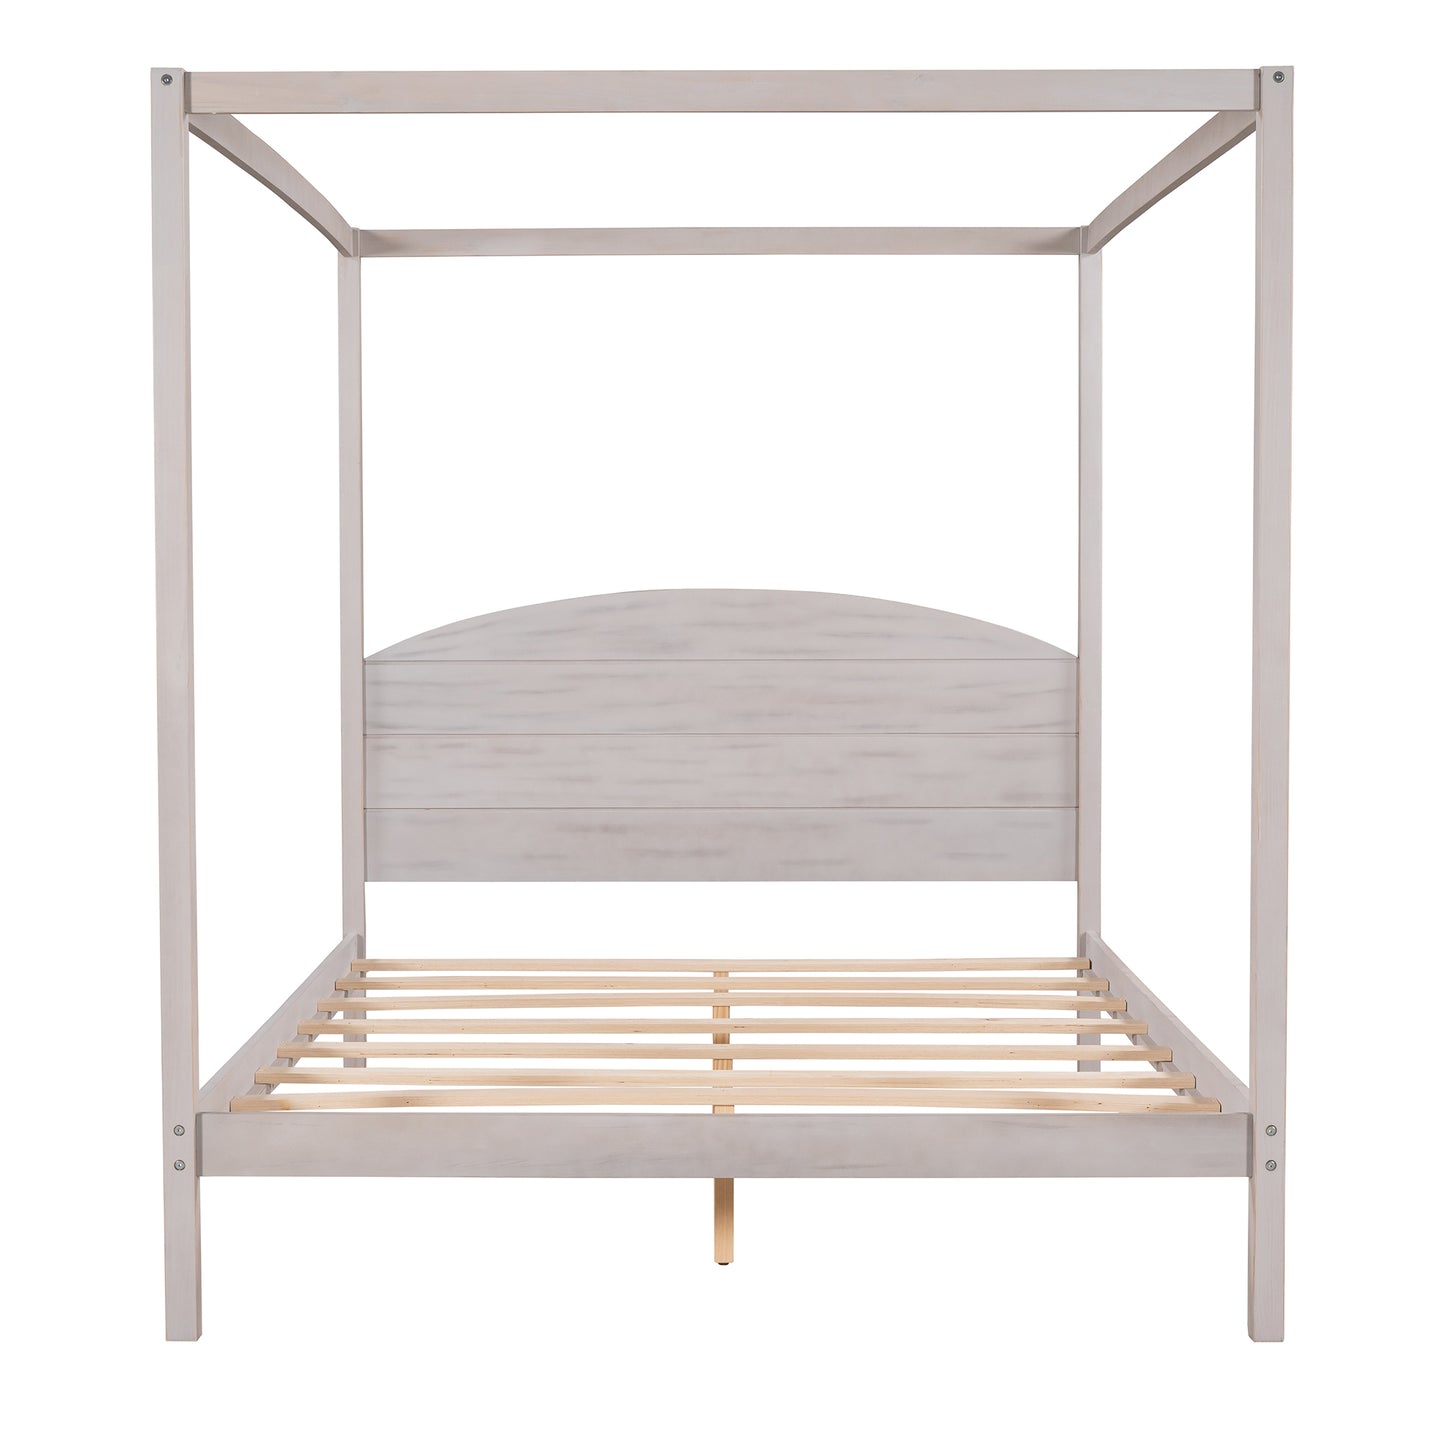 Queen Size Canopy Platform Bed with Headboard and Support Legs,Grey Wash